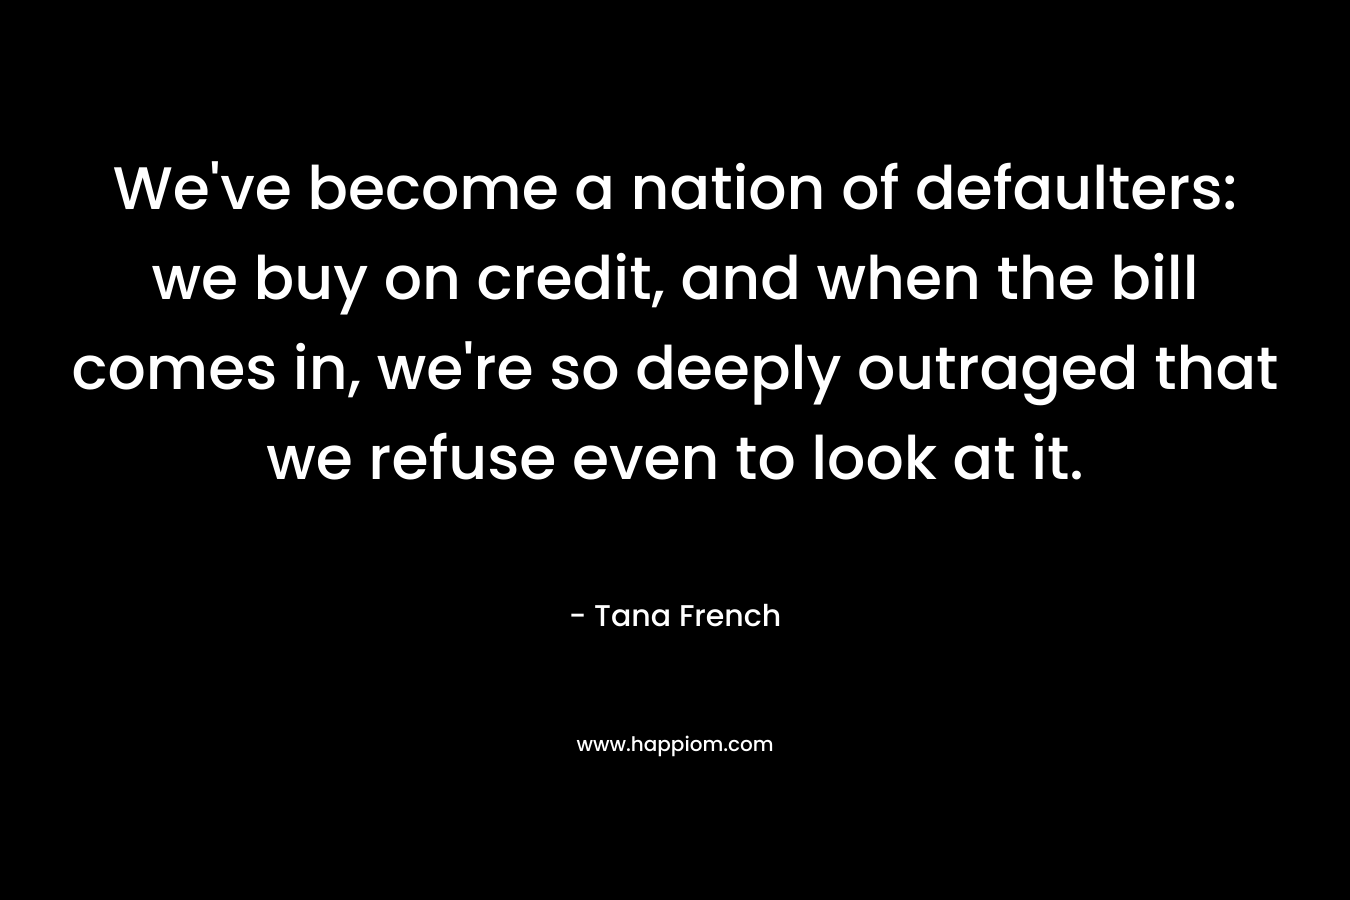 We’ve become a nation of defaulters: we buy on credit, and when the bill comes in, we’re so deeply outraged that we refuse even to look at it. – Tana French